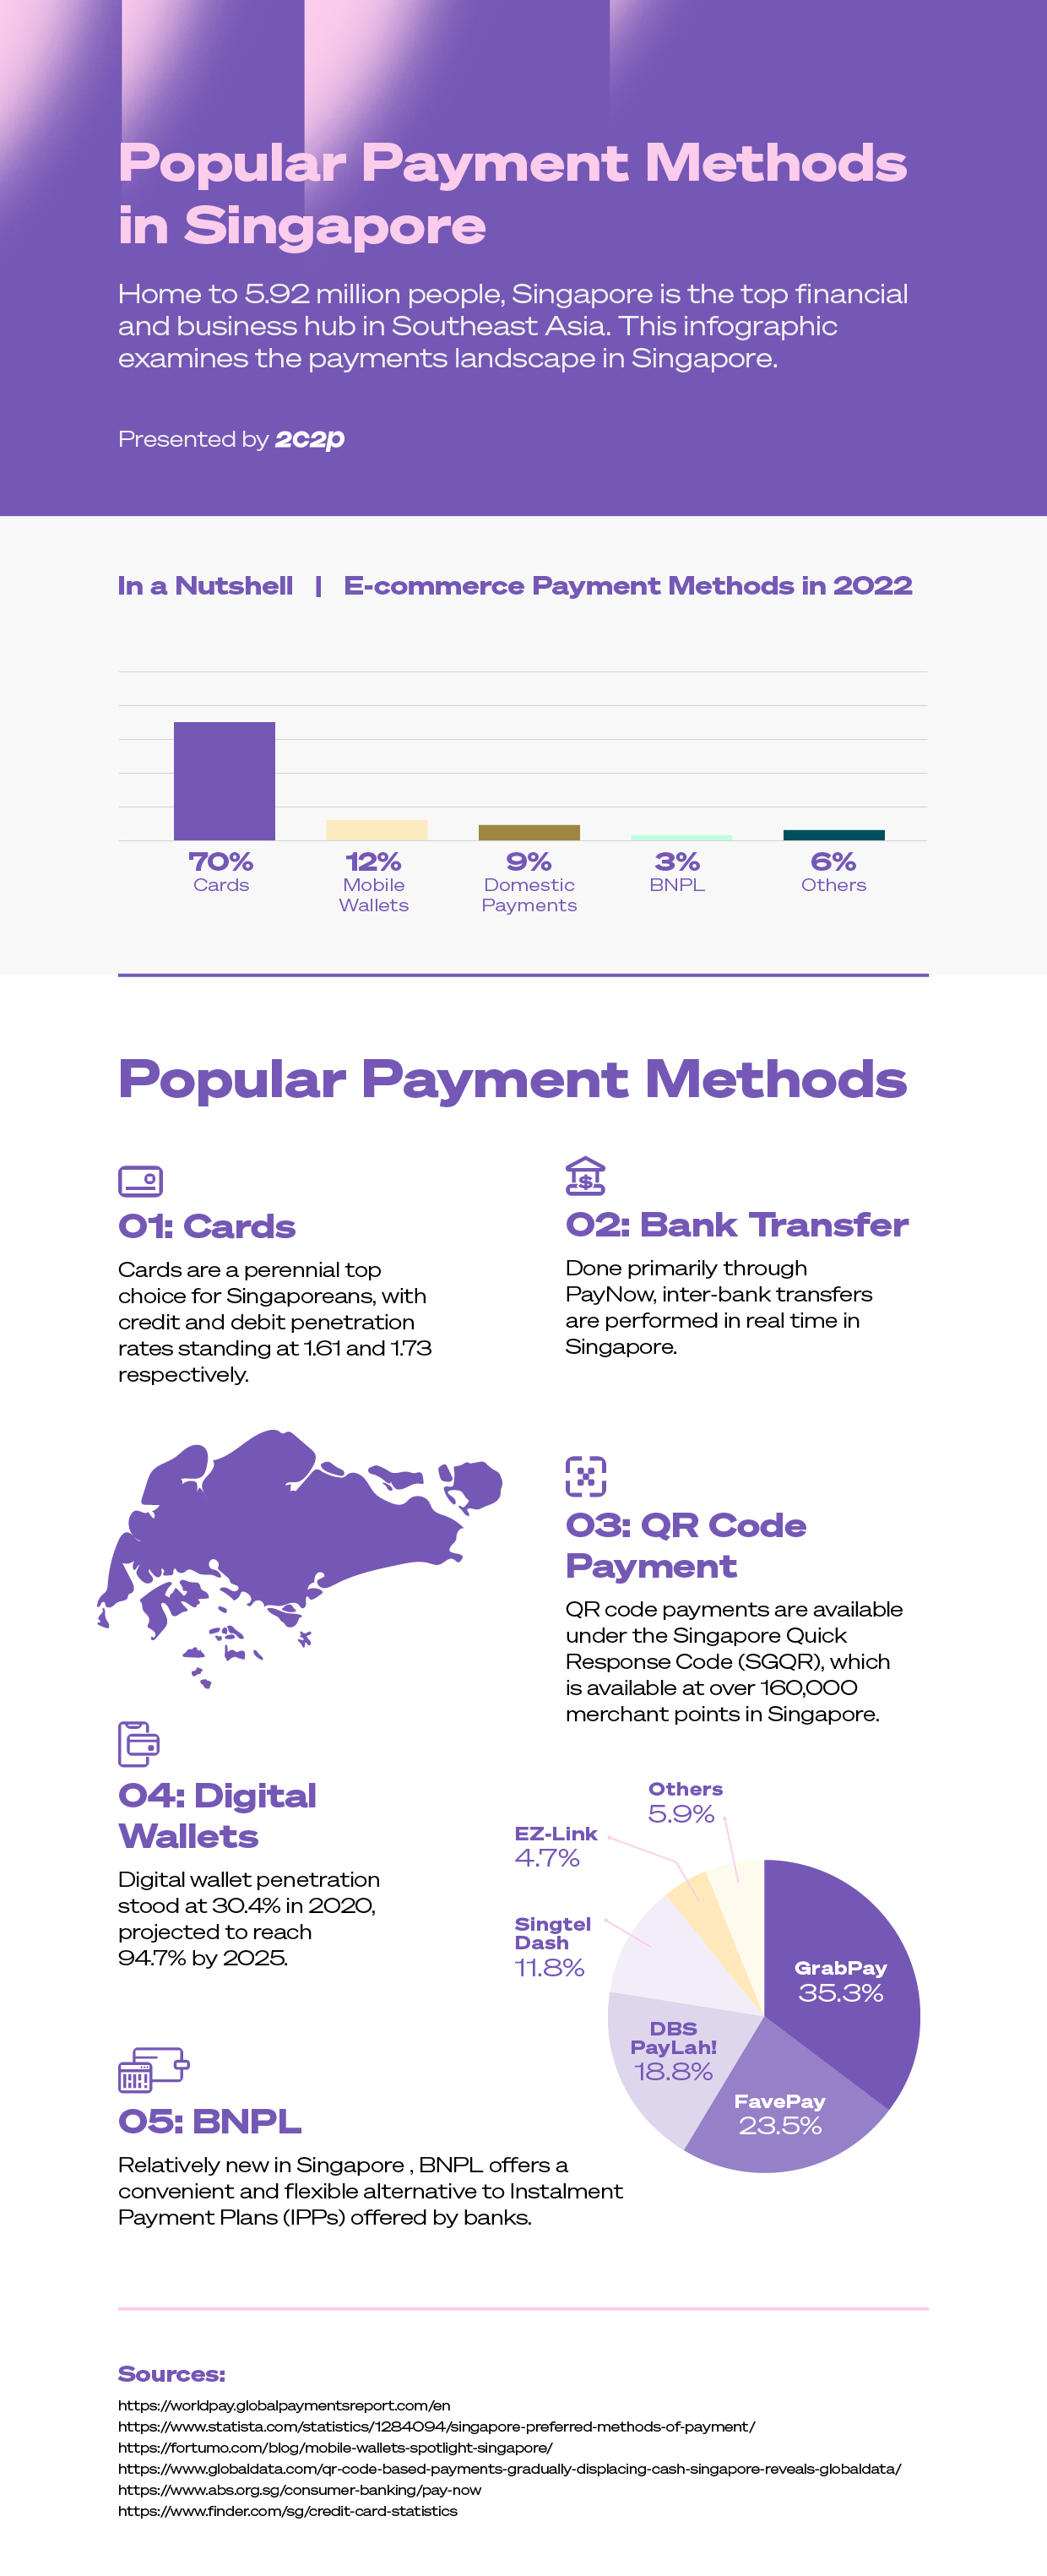 Popular Payment Methods in Singapore